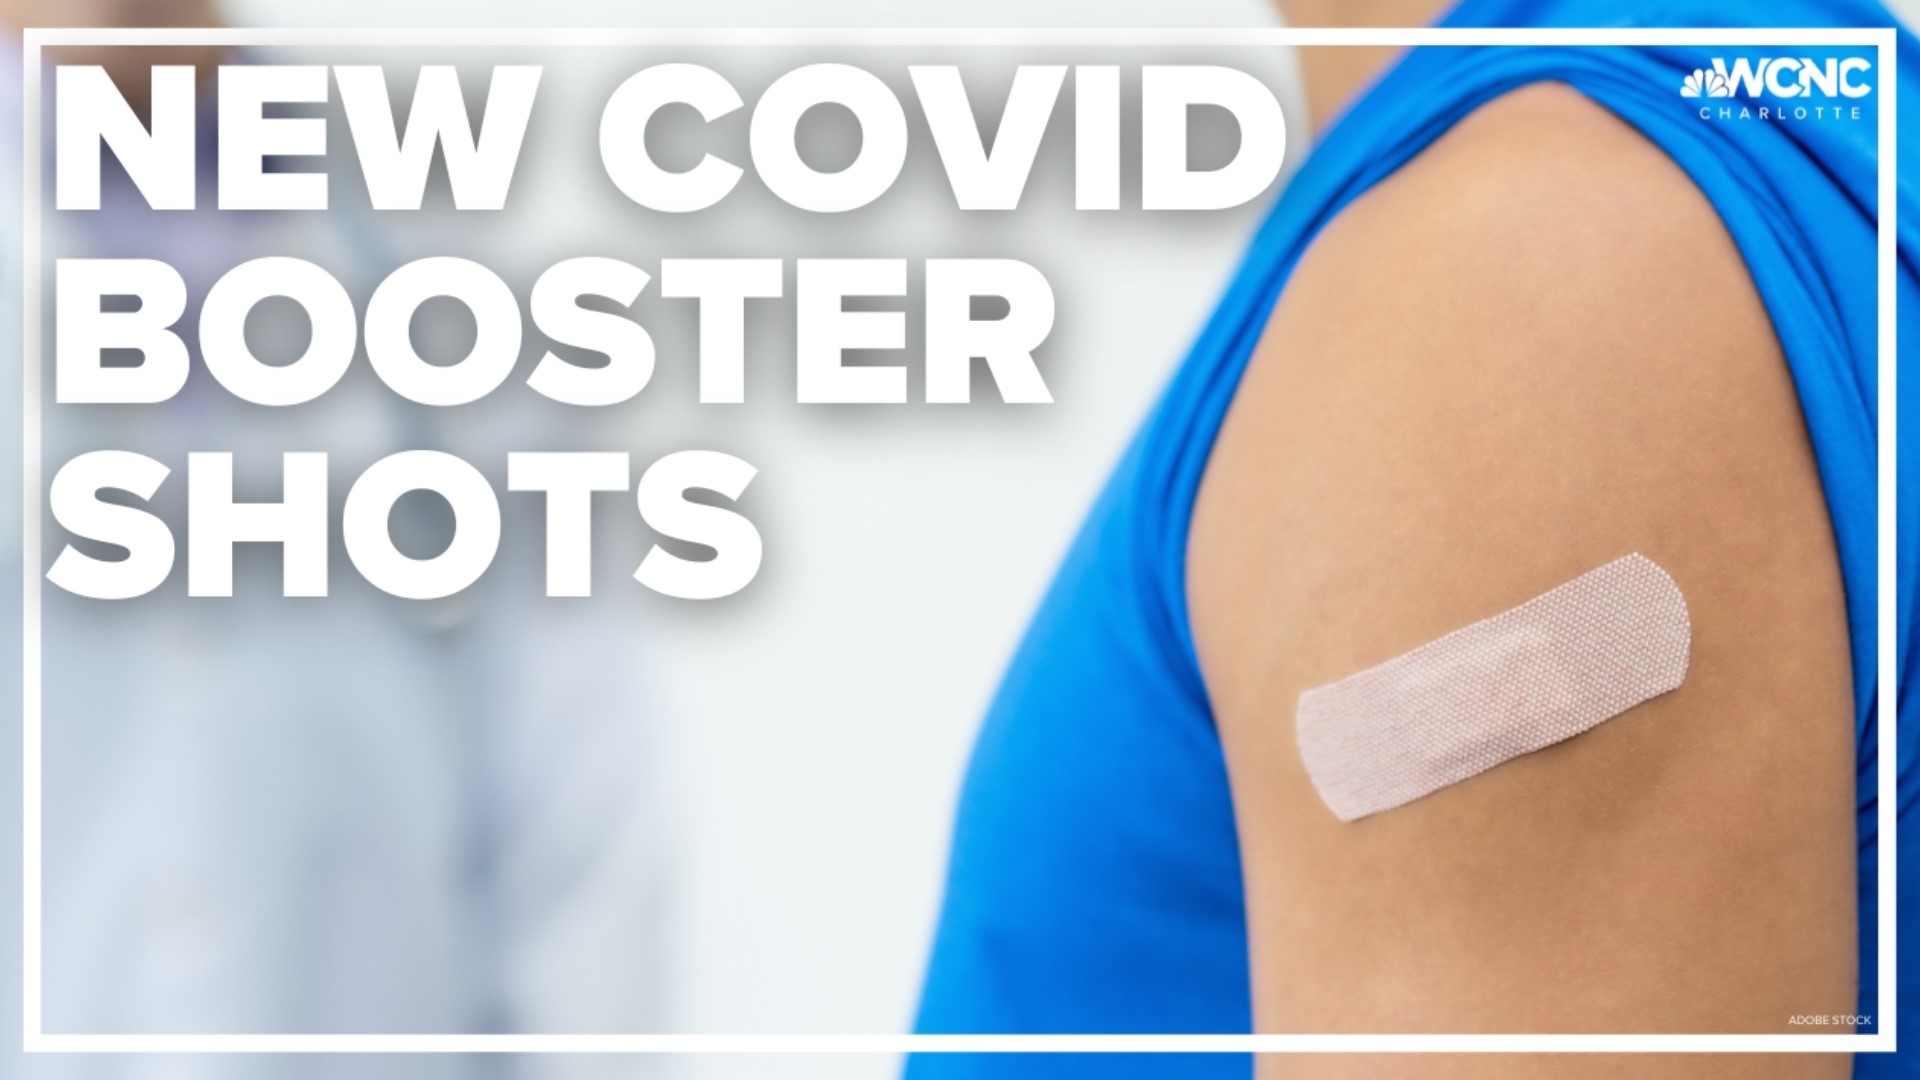 The first doses of the new bivalent COVID-19 booster shots were given in Charlotte on Wednesday.